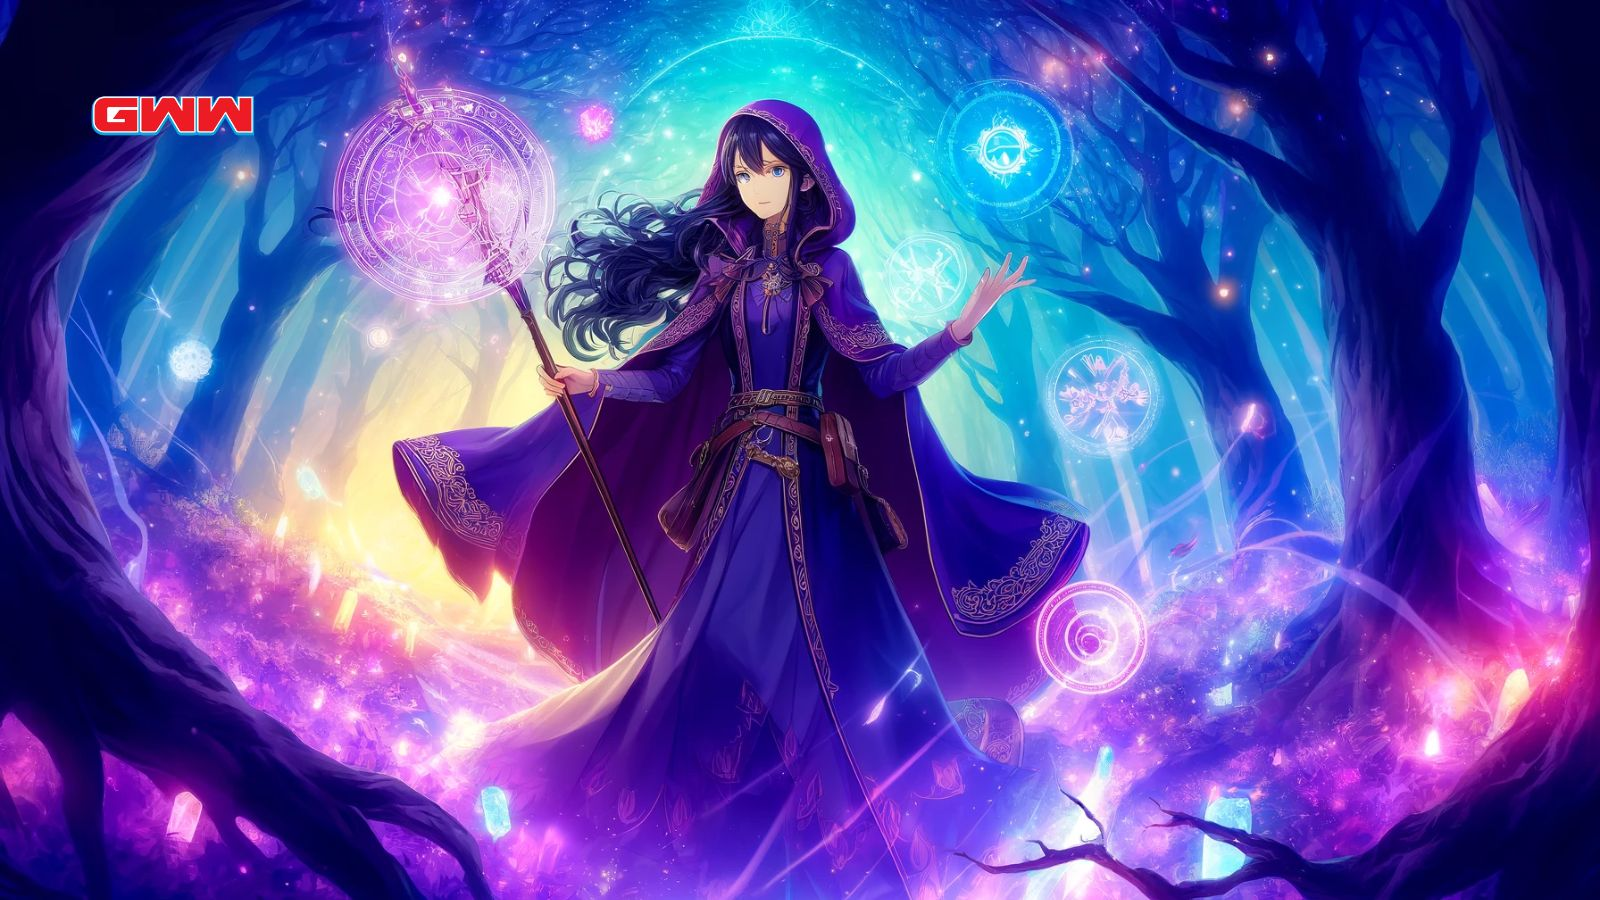 Merlin casting spells in a mystical forest, how to get Merlin Anime Adventures